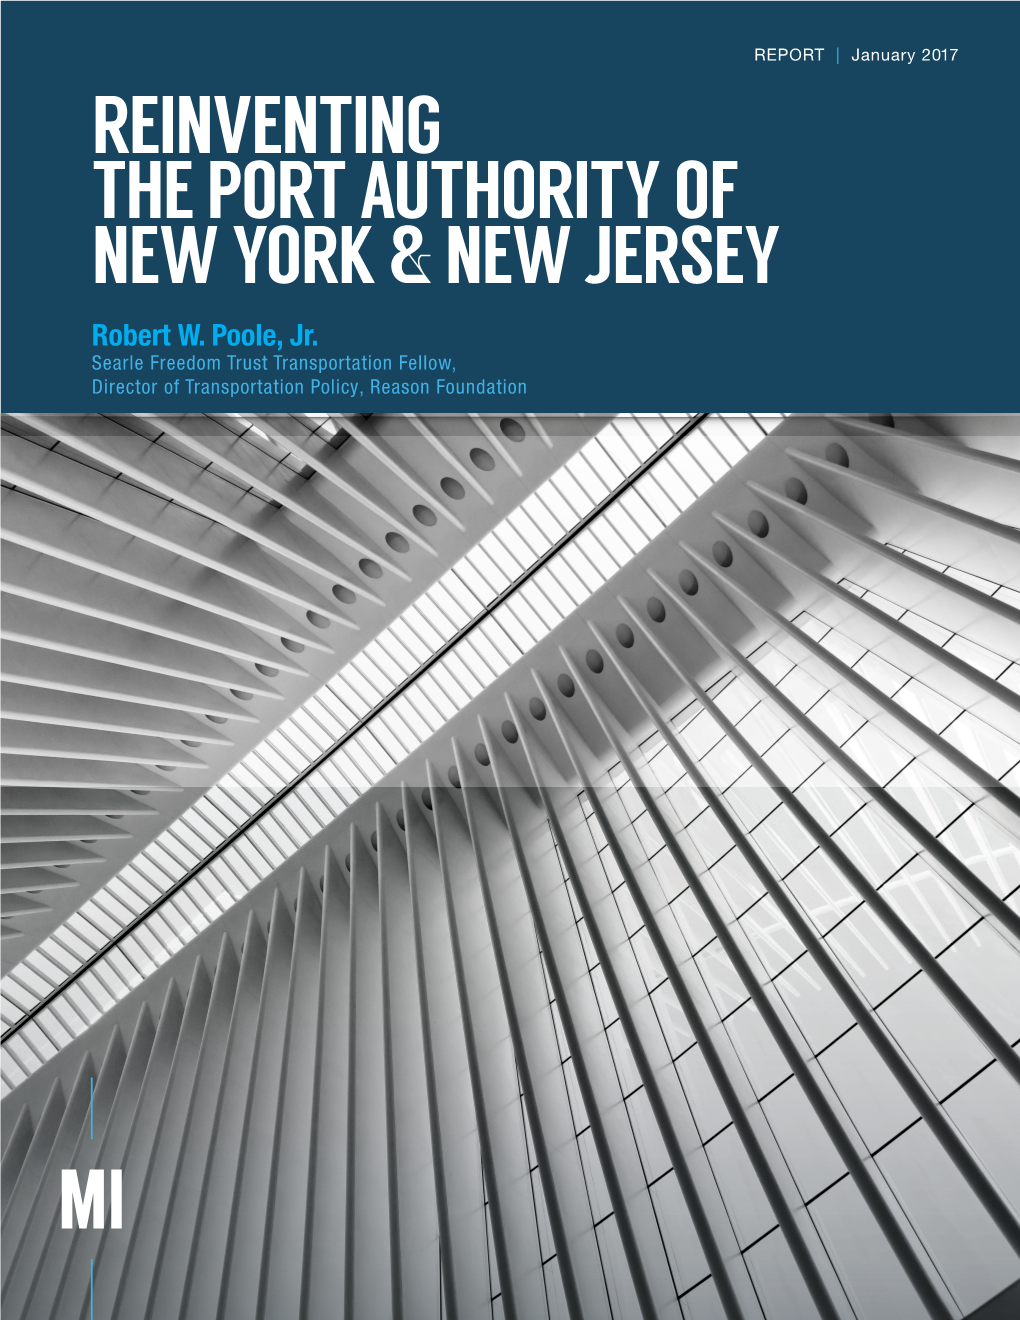 Reinventing the Port Authority of New York & New Jersey